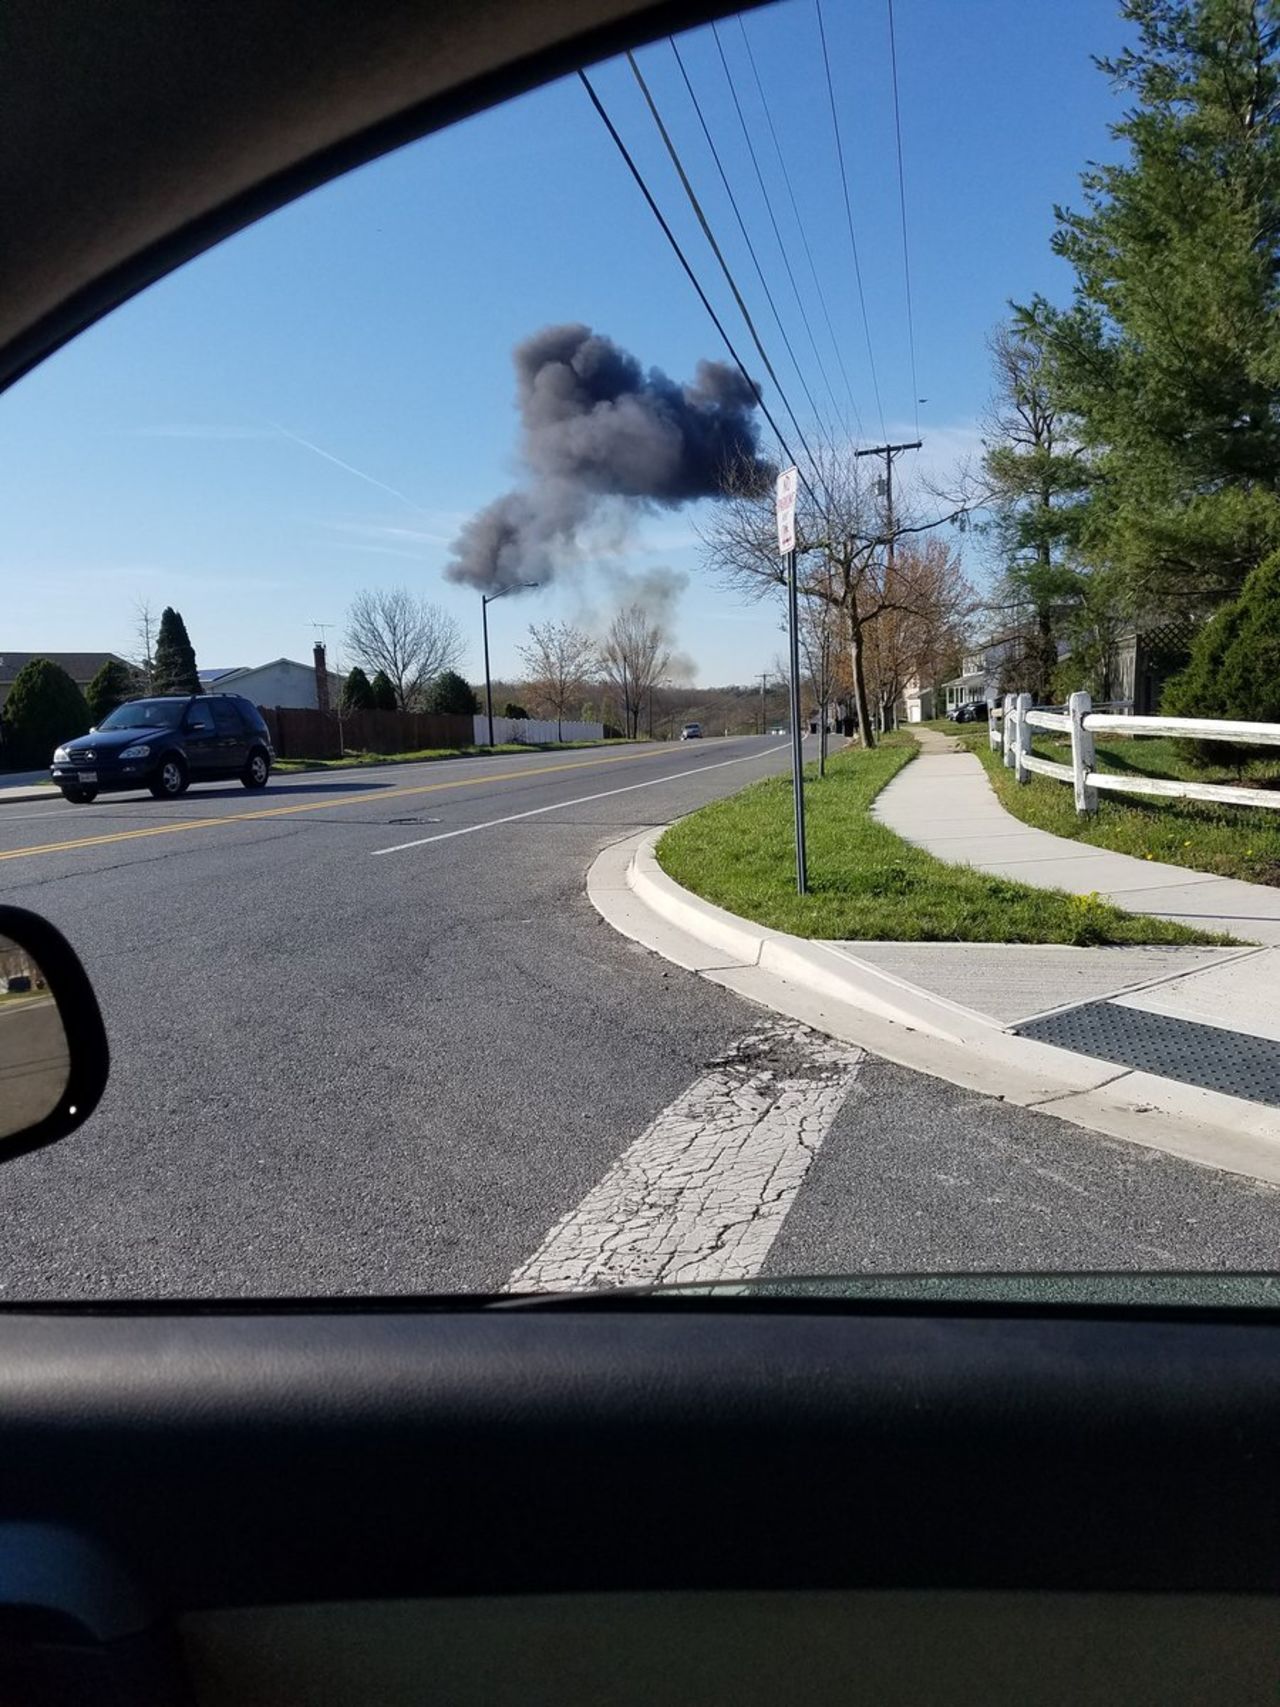 <strong>April 5, 20917:</strong> A <a href="http://www.cnn.com/2017/04/05/politics/fighter-jet-crash-maryland/index.html" target="_blank">US F-16 crashed </a>several miles outside Joint Base Andrews in Maryland. The pilot safely ejected.